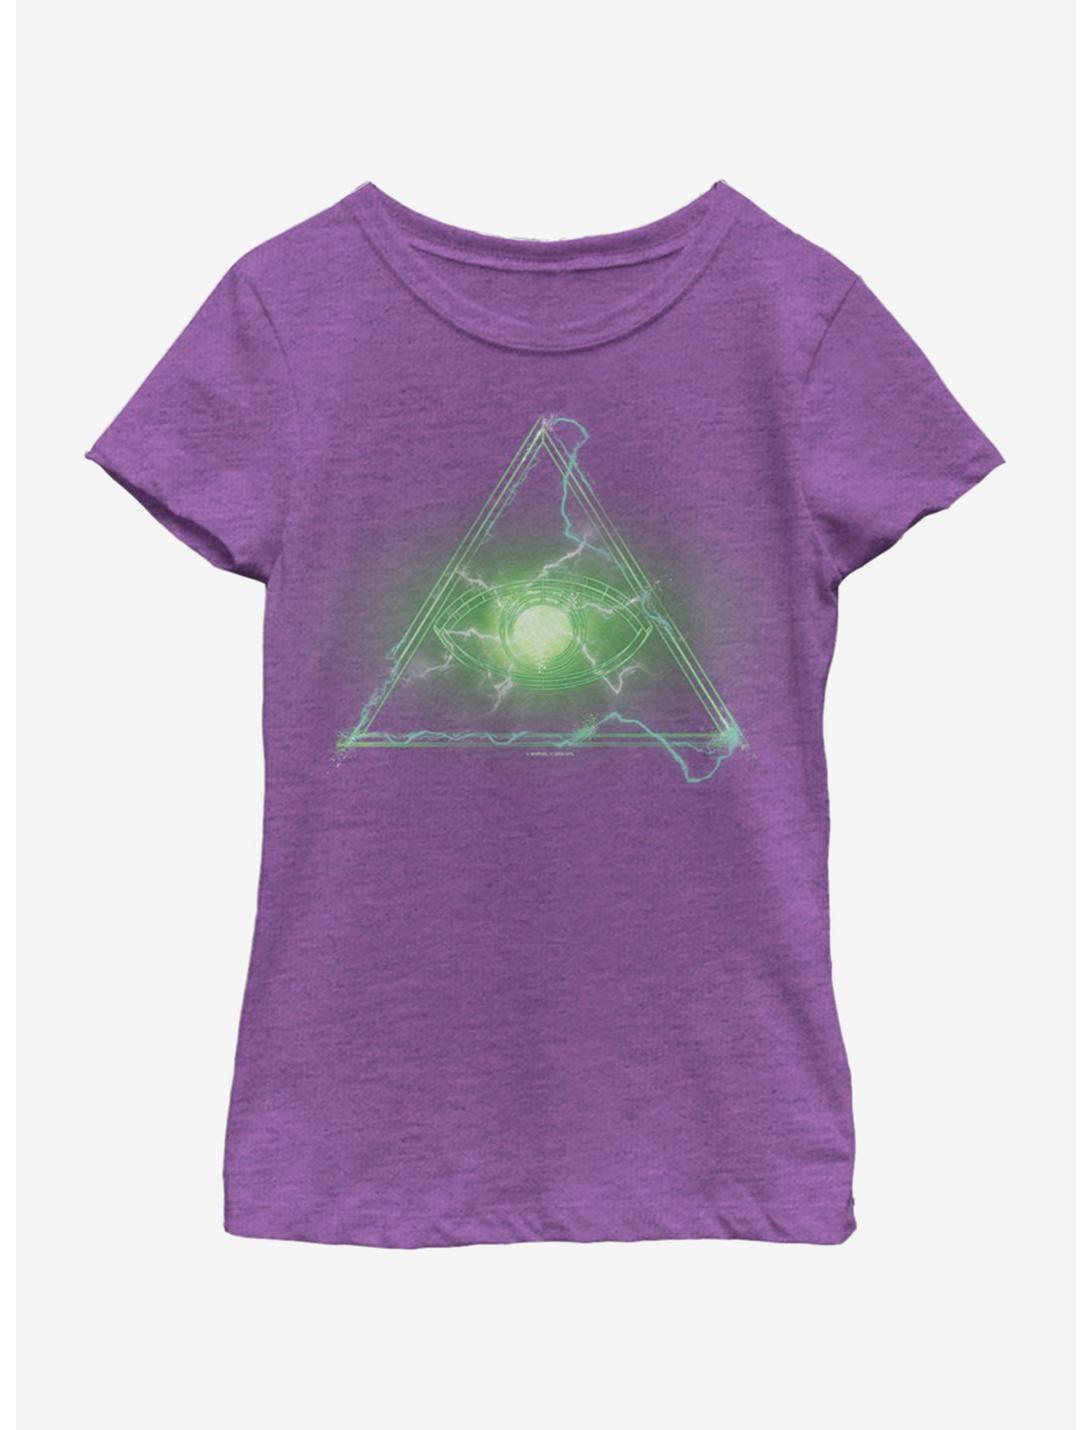 Marvel Spiderman: Far From Home Green Eye Youth Girls T-Shirt, PURPLE BERRY, hi-res